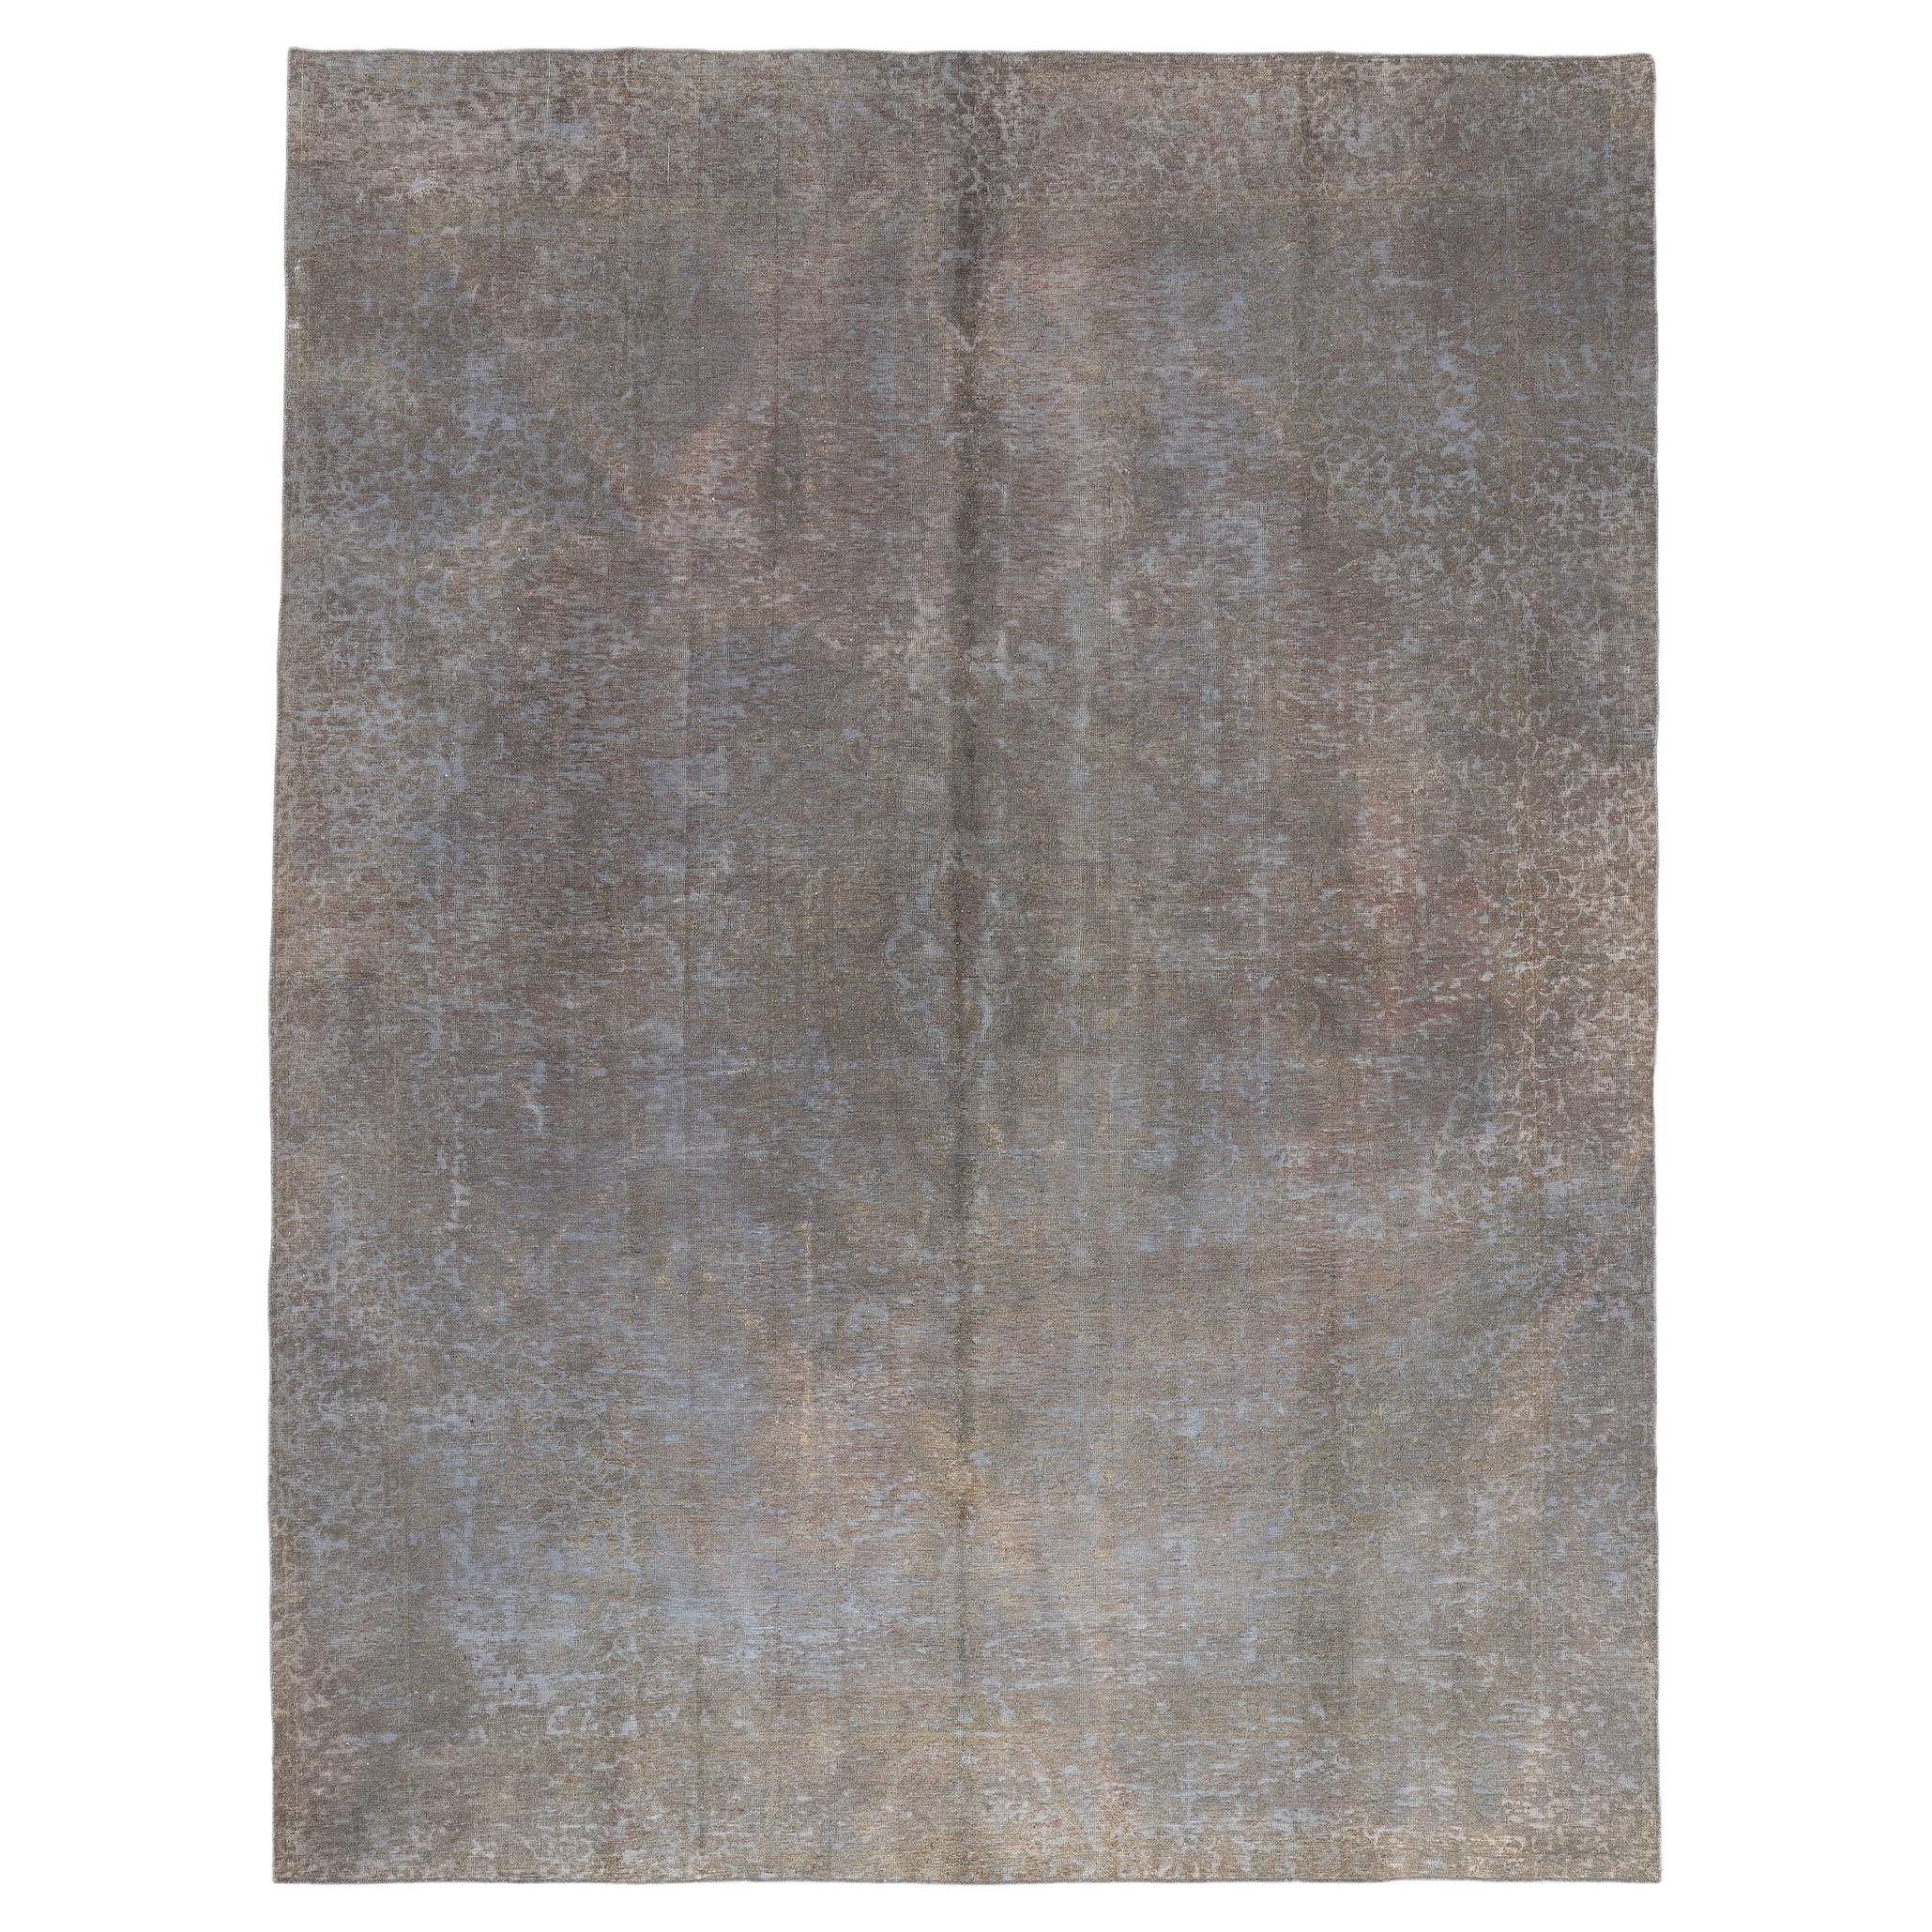 Vintage Turkish Overdyed Rug, Luxe Utilitarian Appeal Meets Modern Industrial